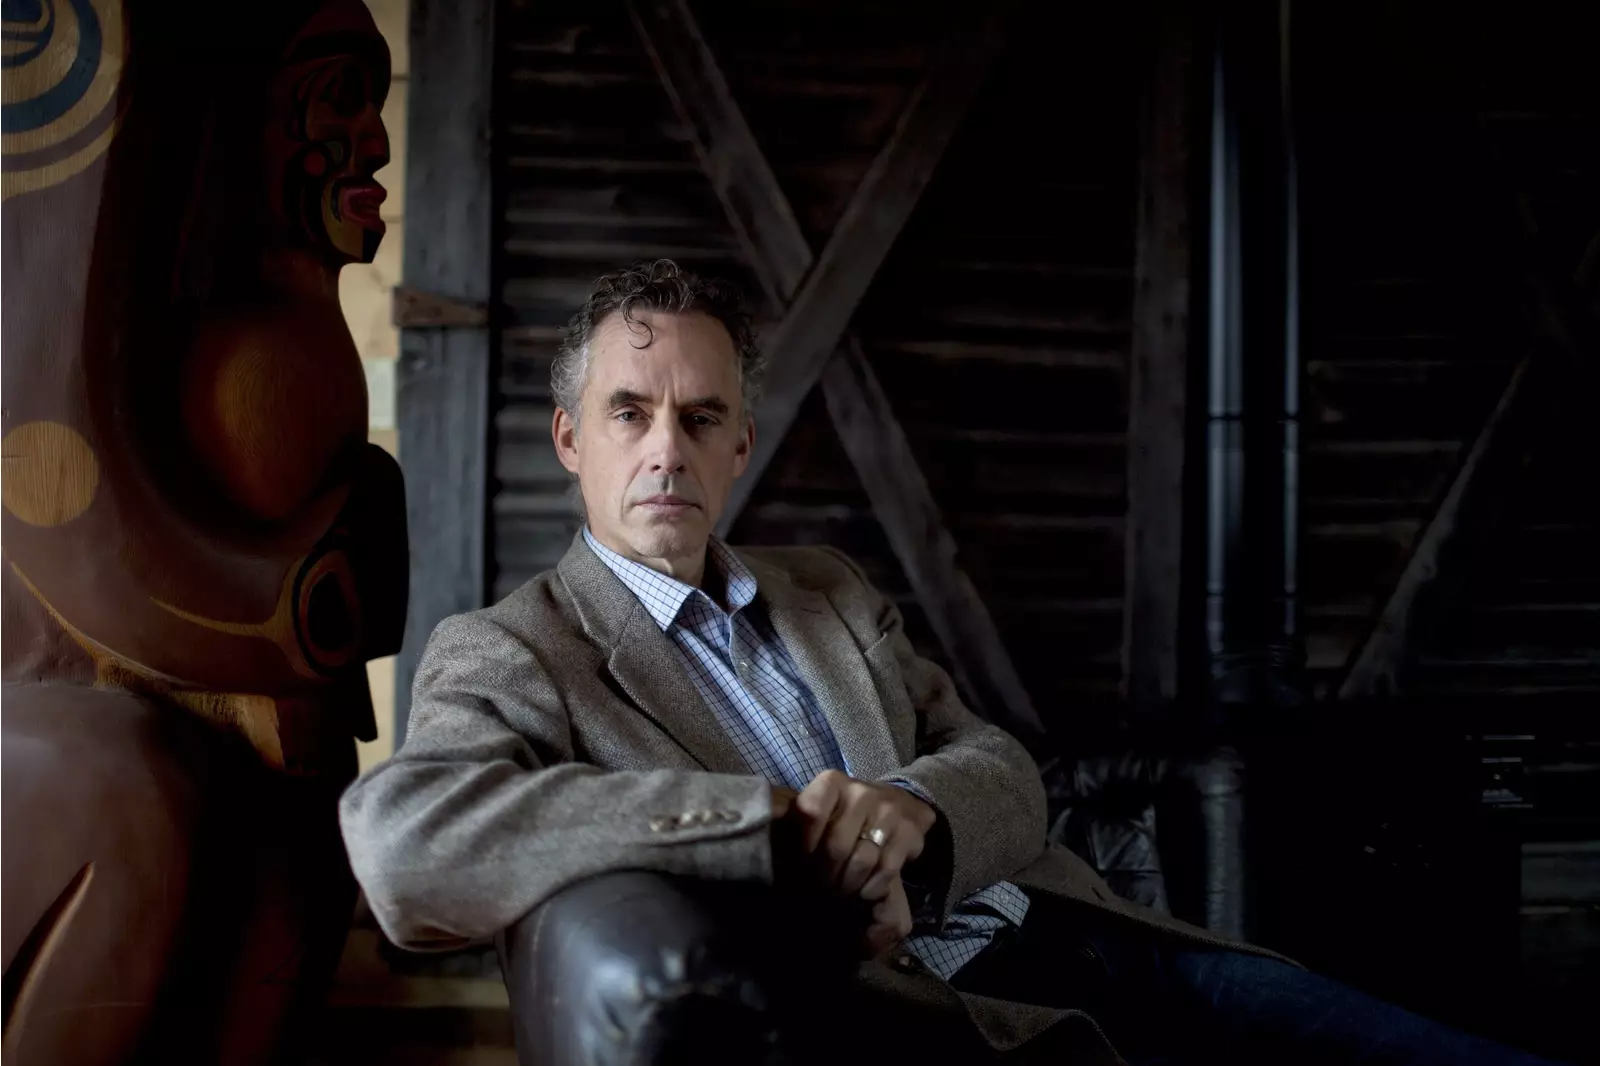 Jordan Peterson asks “Why should you wear makeup in the workplace”